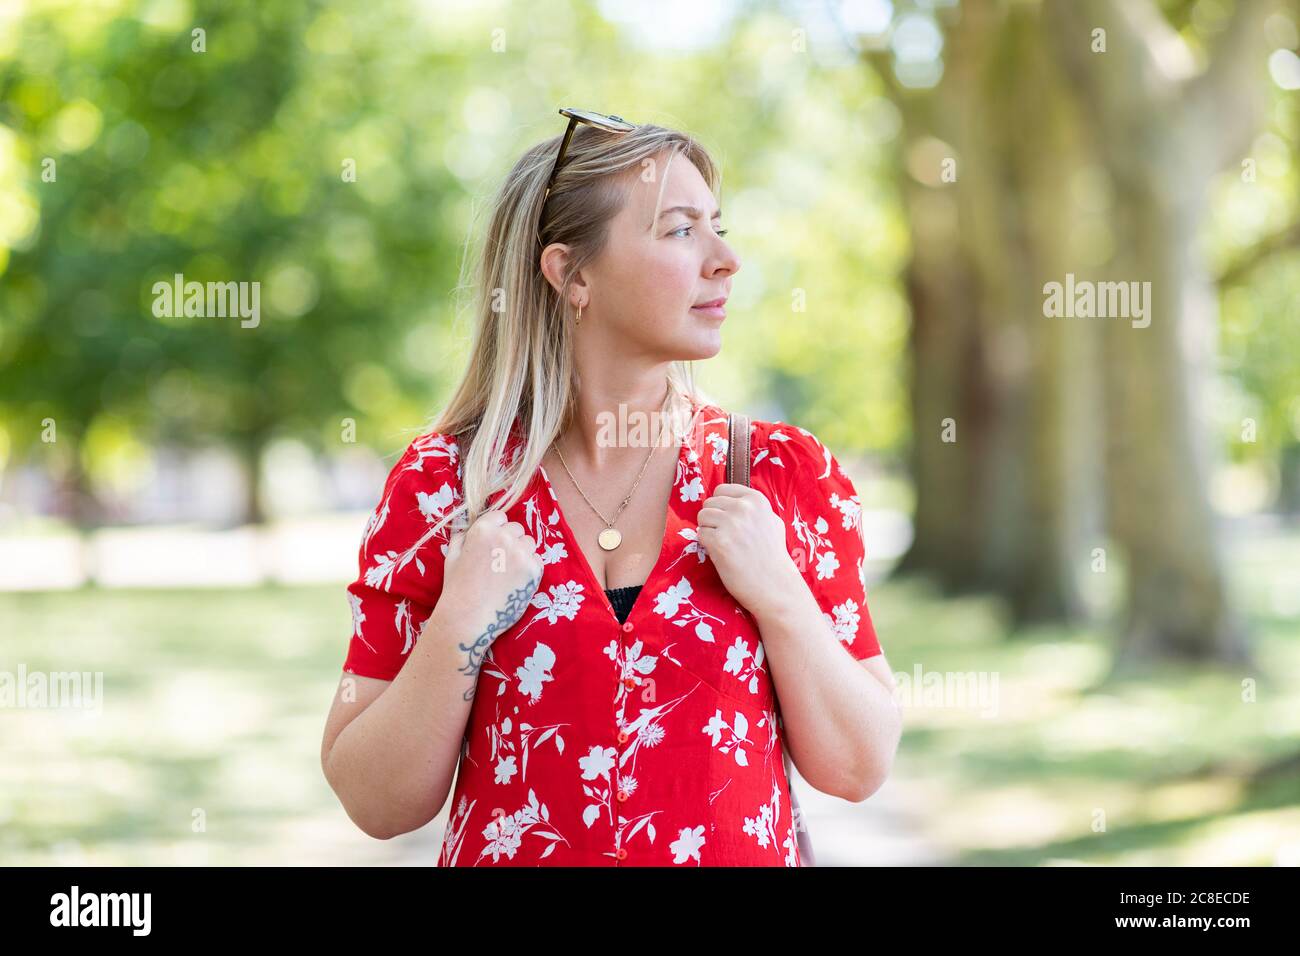 Thoughtful woman standing in public park during sunny day Stock Photo